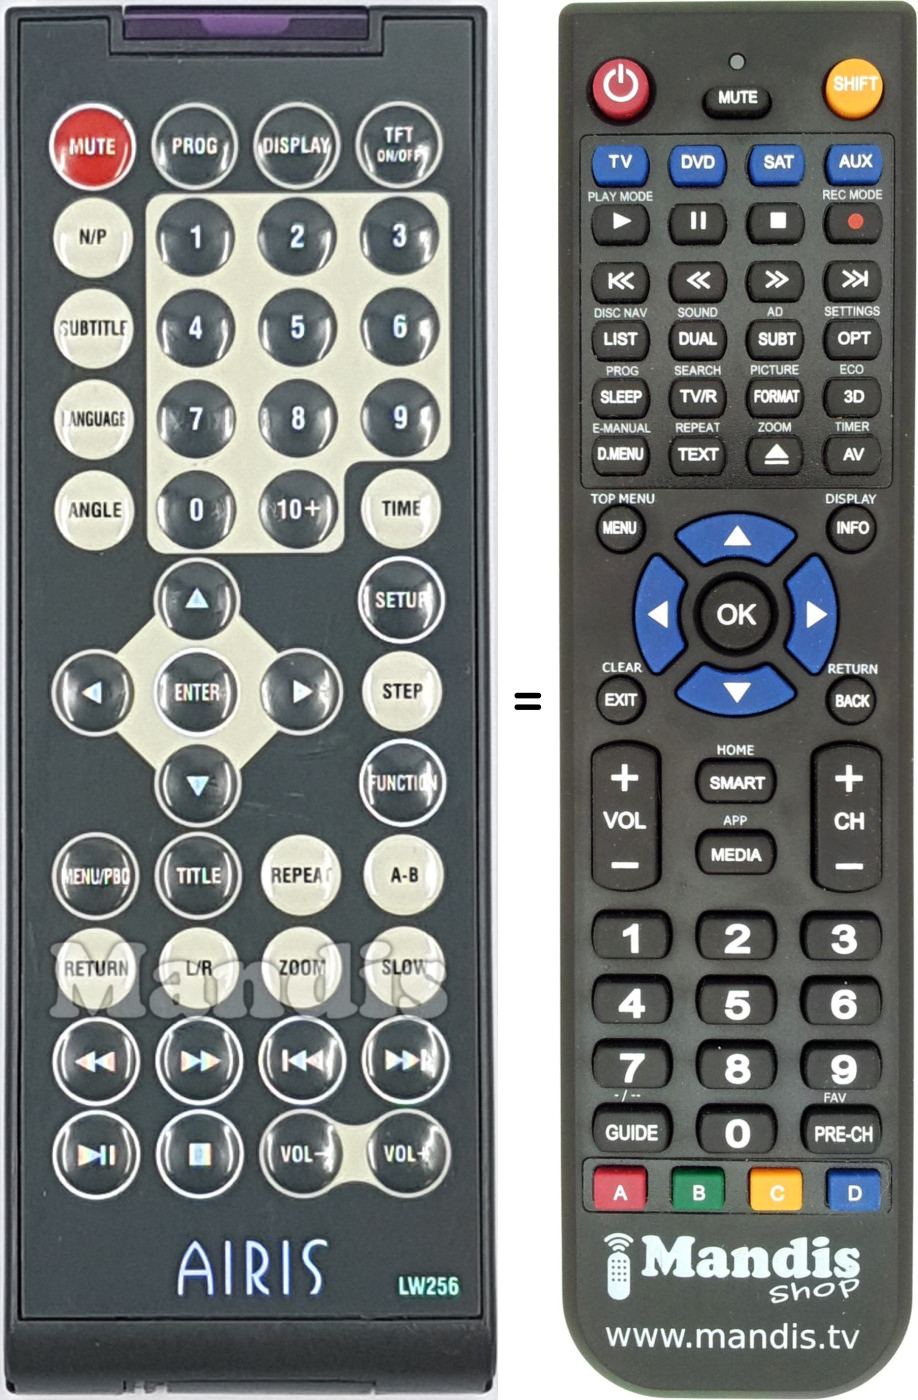 Replacement remote control LW256